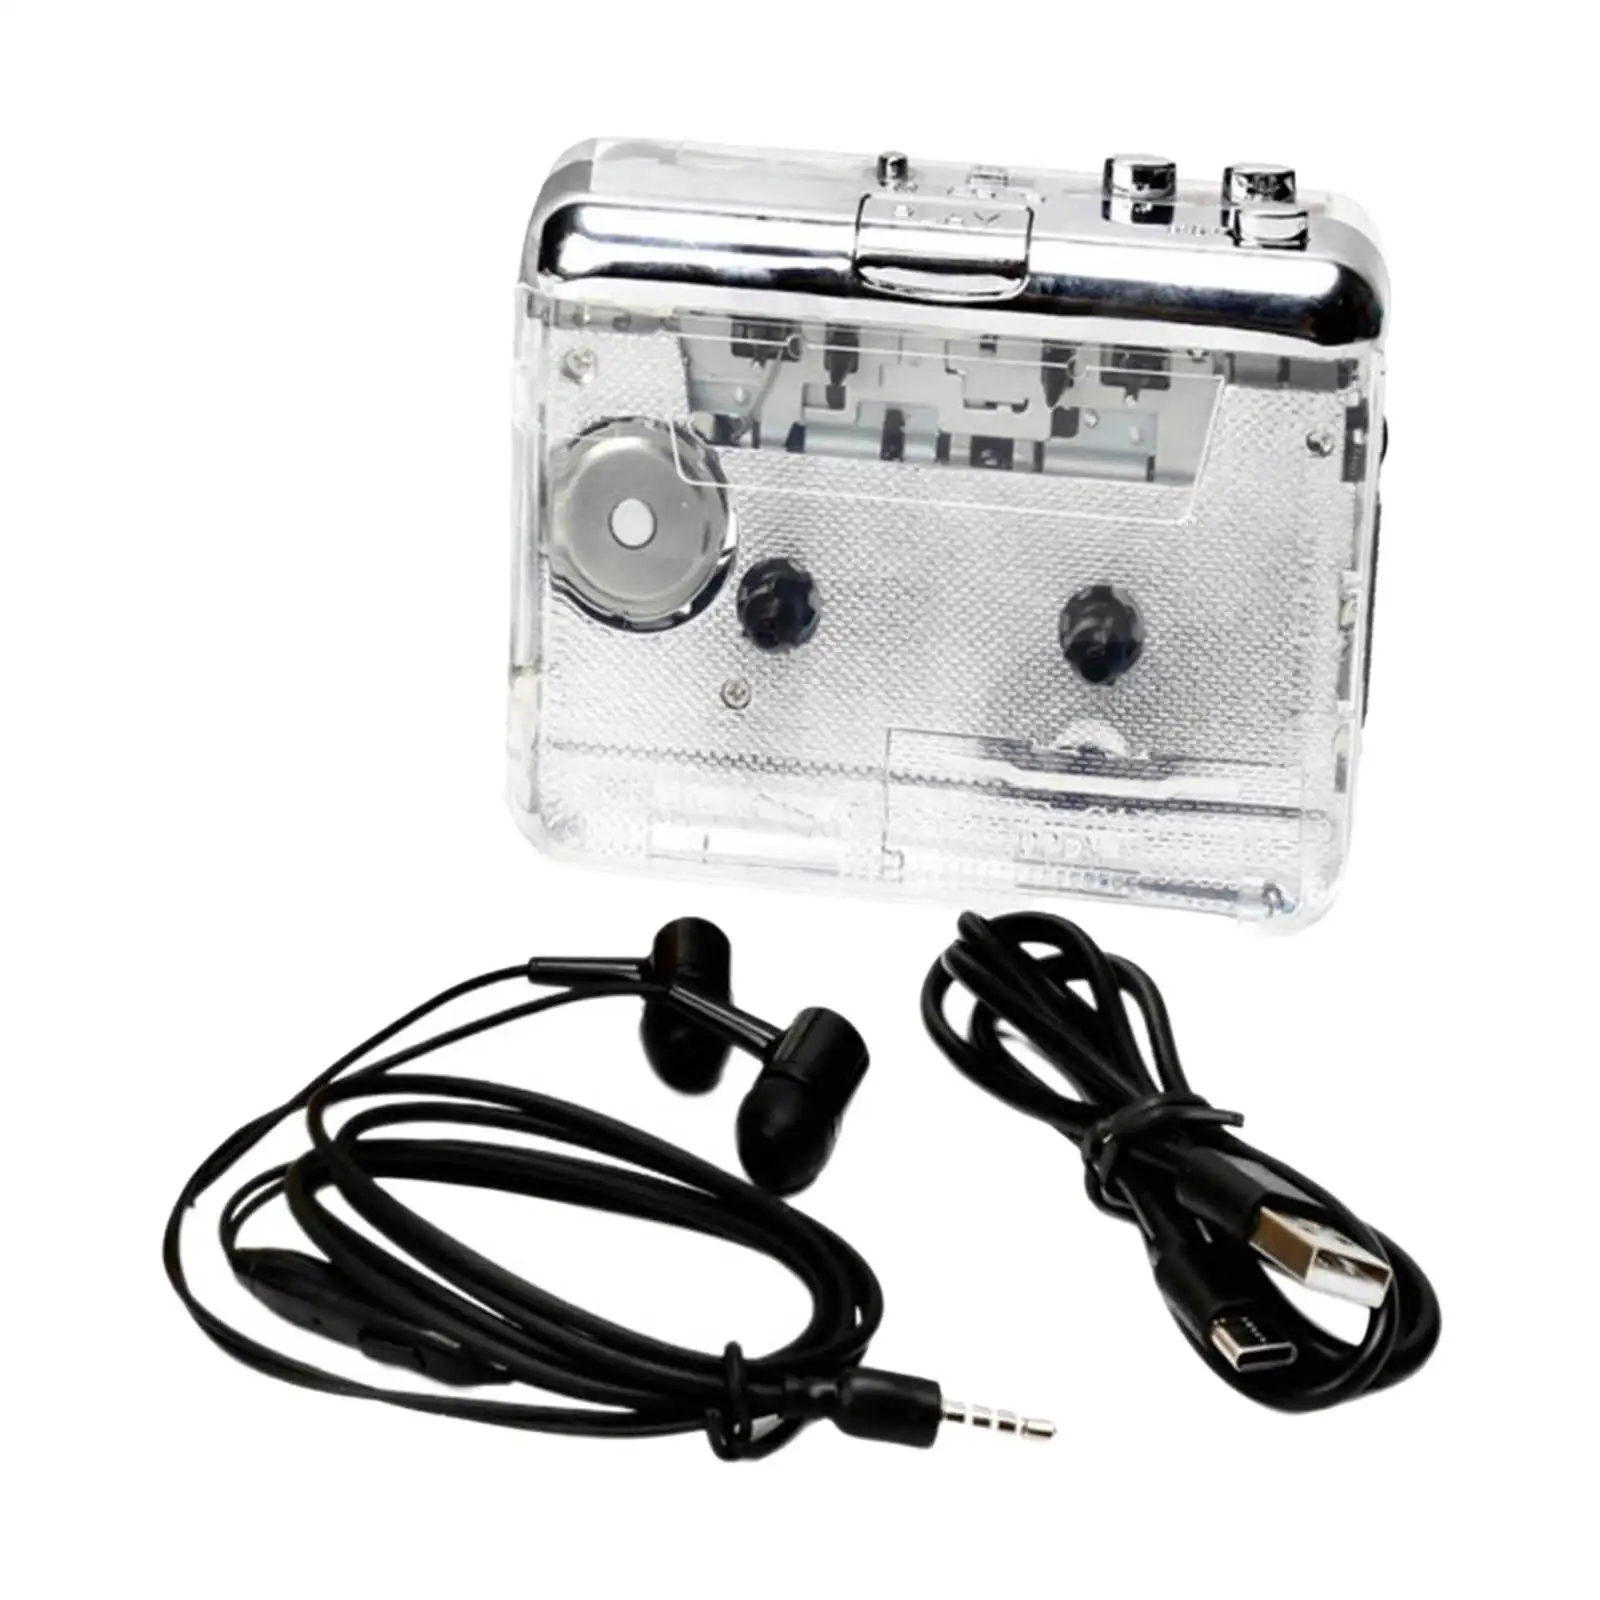 USB Cassette Tape to MP3 CD Cassette Player Powered by Battery or USB Portable Converter for Laptop PC Computers Audio Via USB